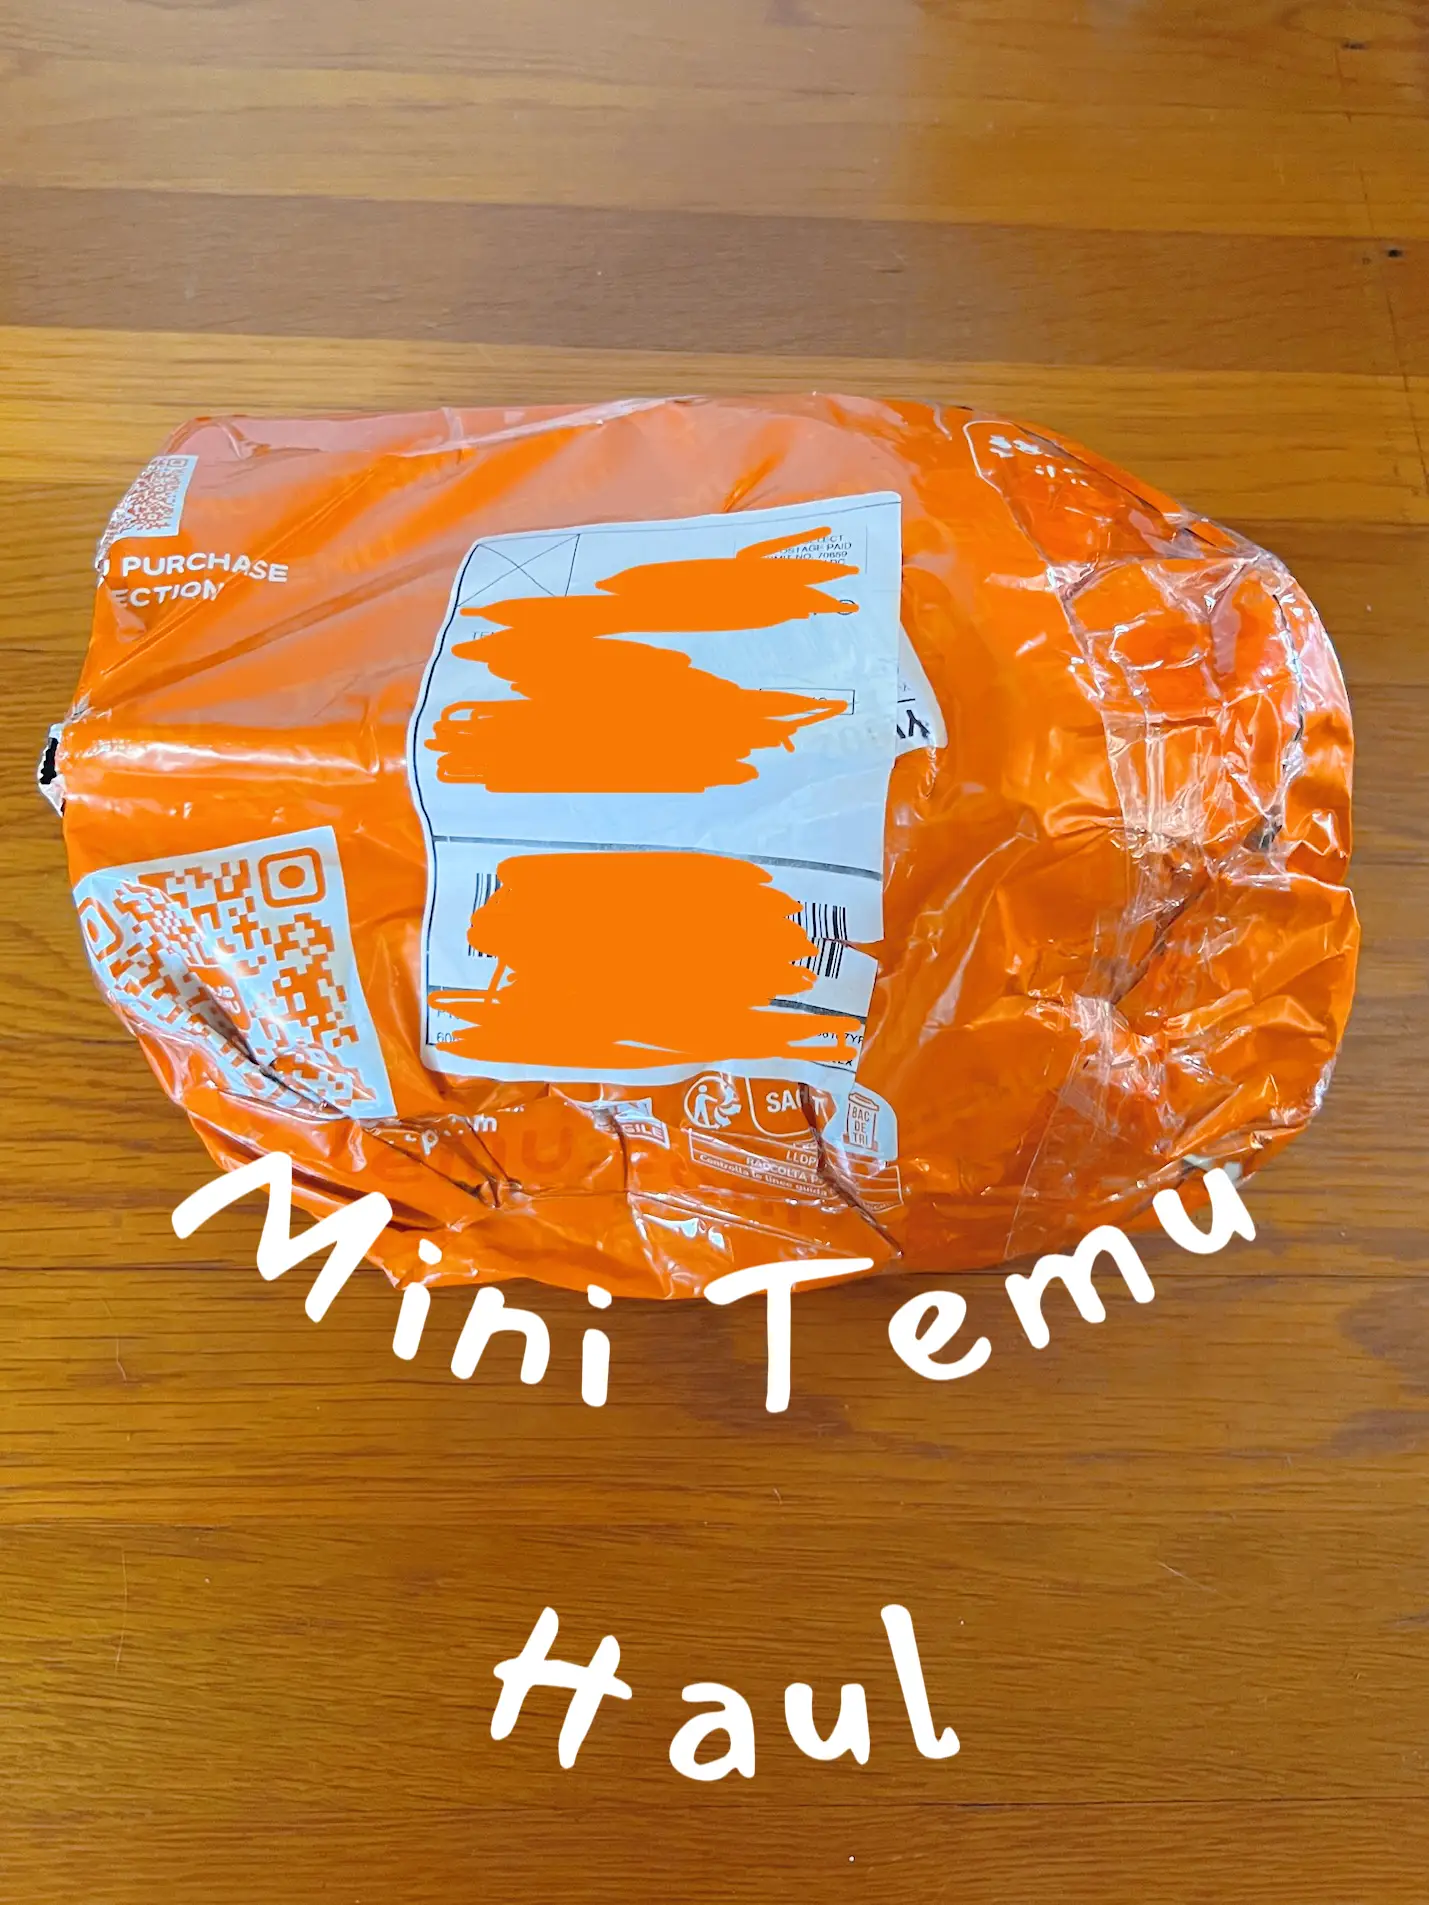 NEW TEMU HAUL & REVIEW 2023!AMAZING HOUSEHOLD ITEMS & MORE! MUST SEE! GREAT  PRICES! #temu #temuhaul 